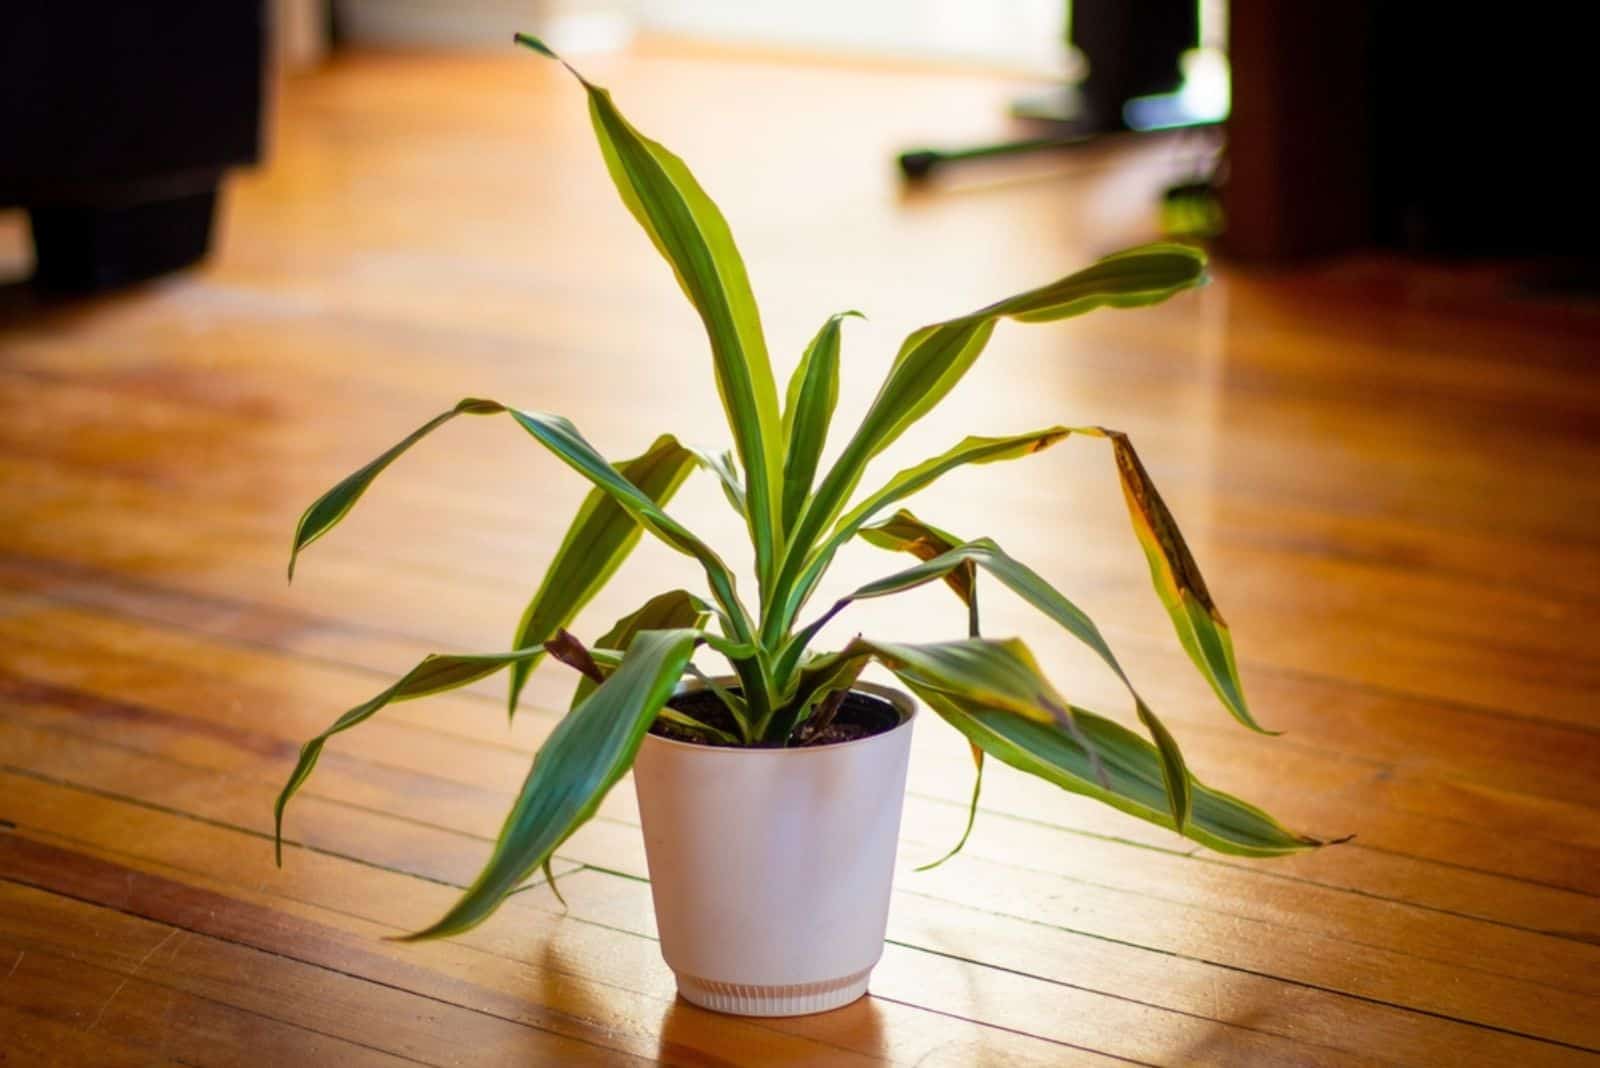 Snake plant on hardwood floor with dying leaves